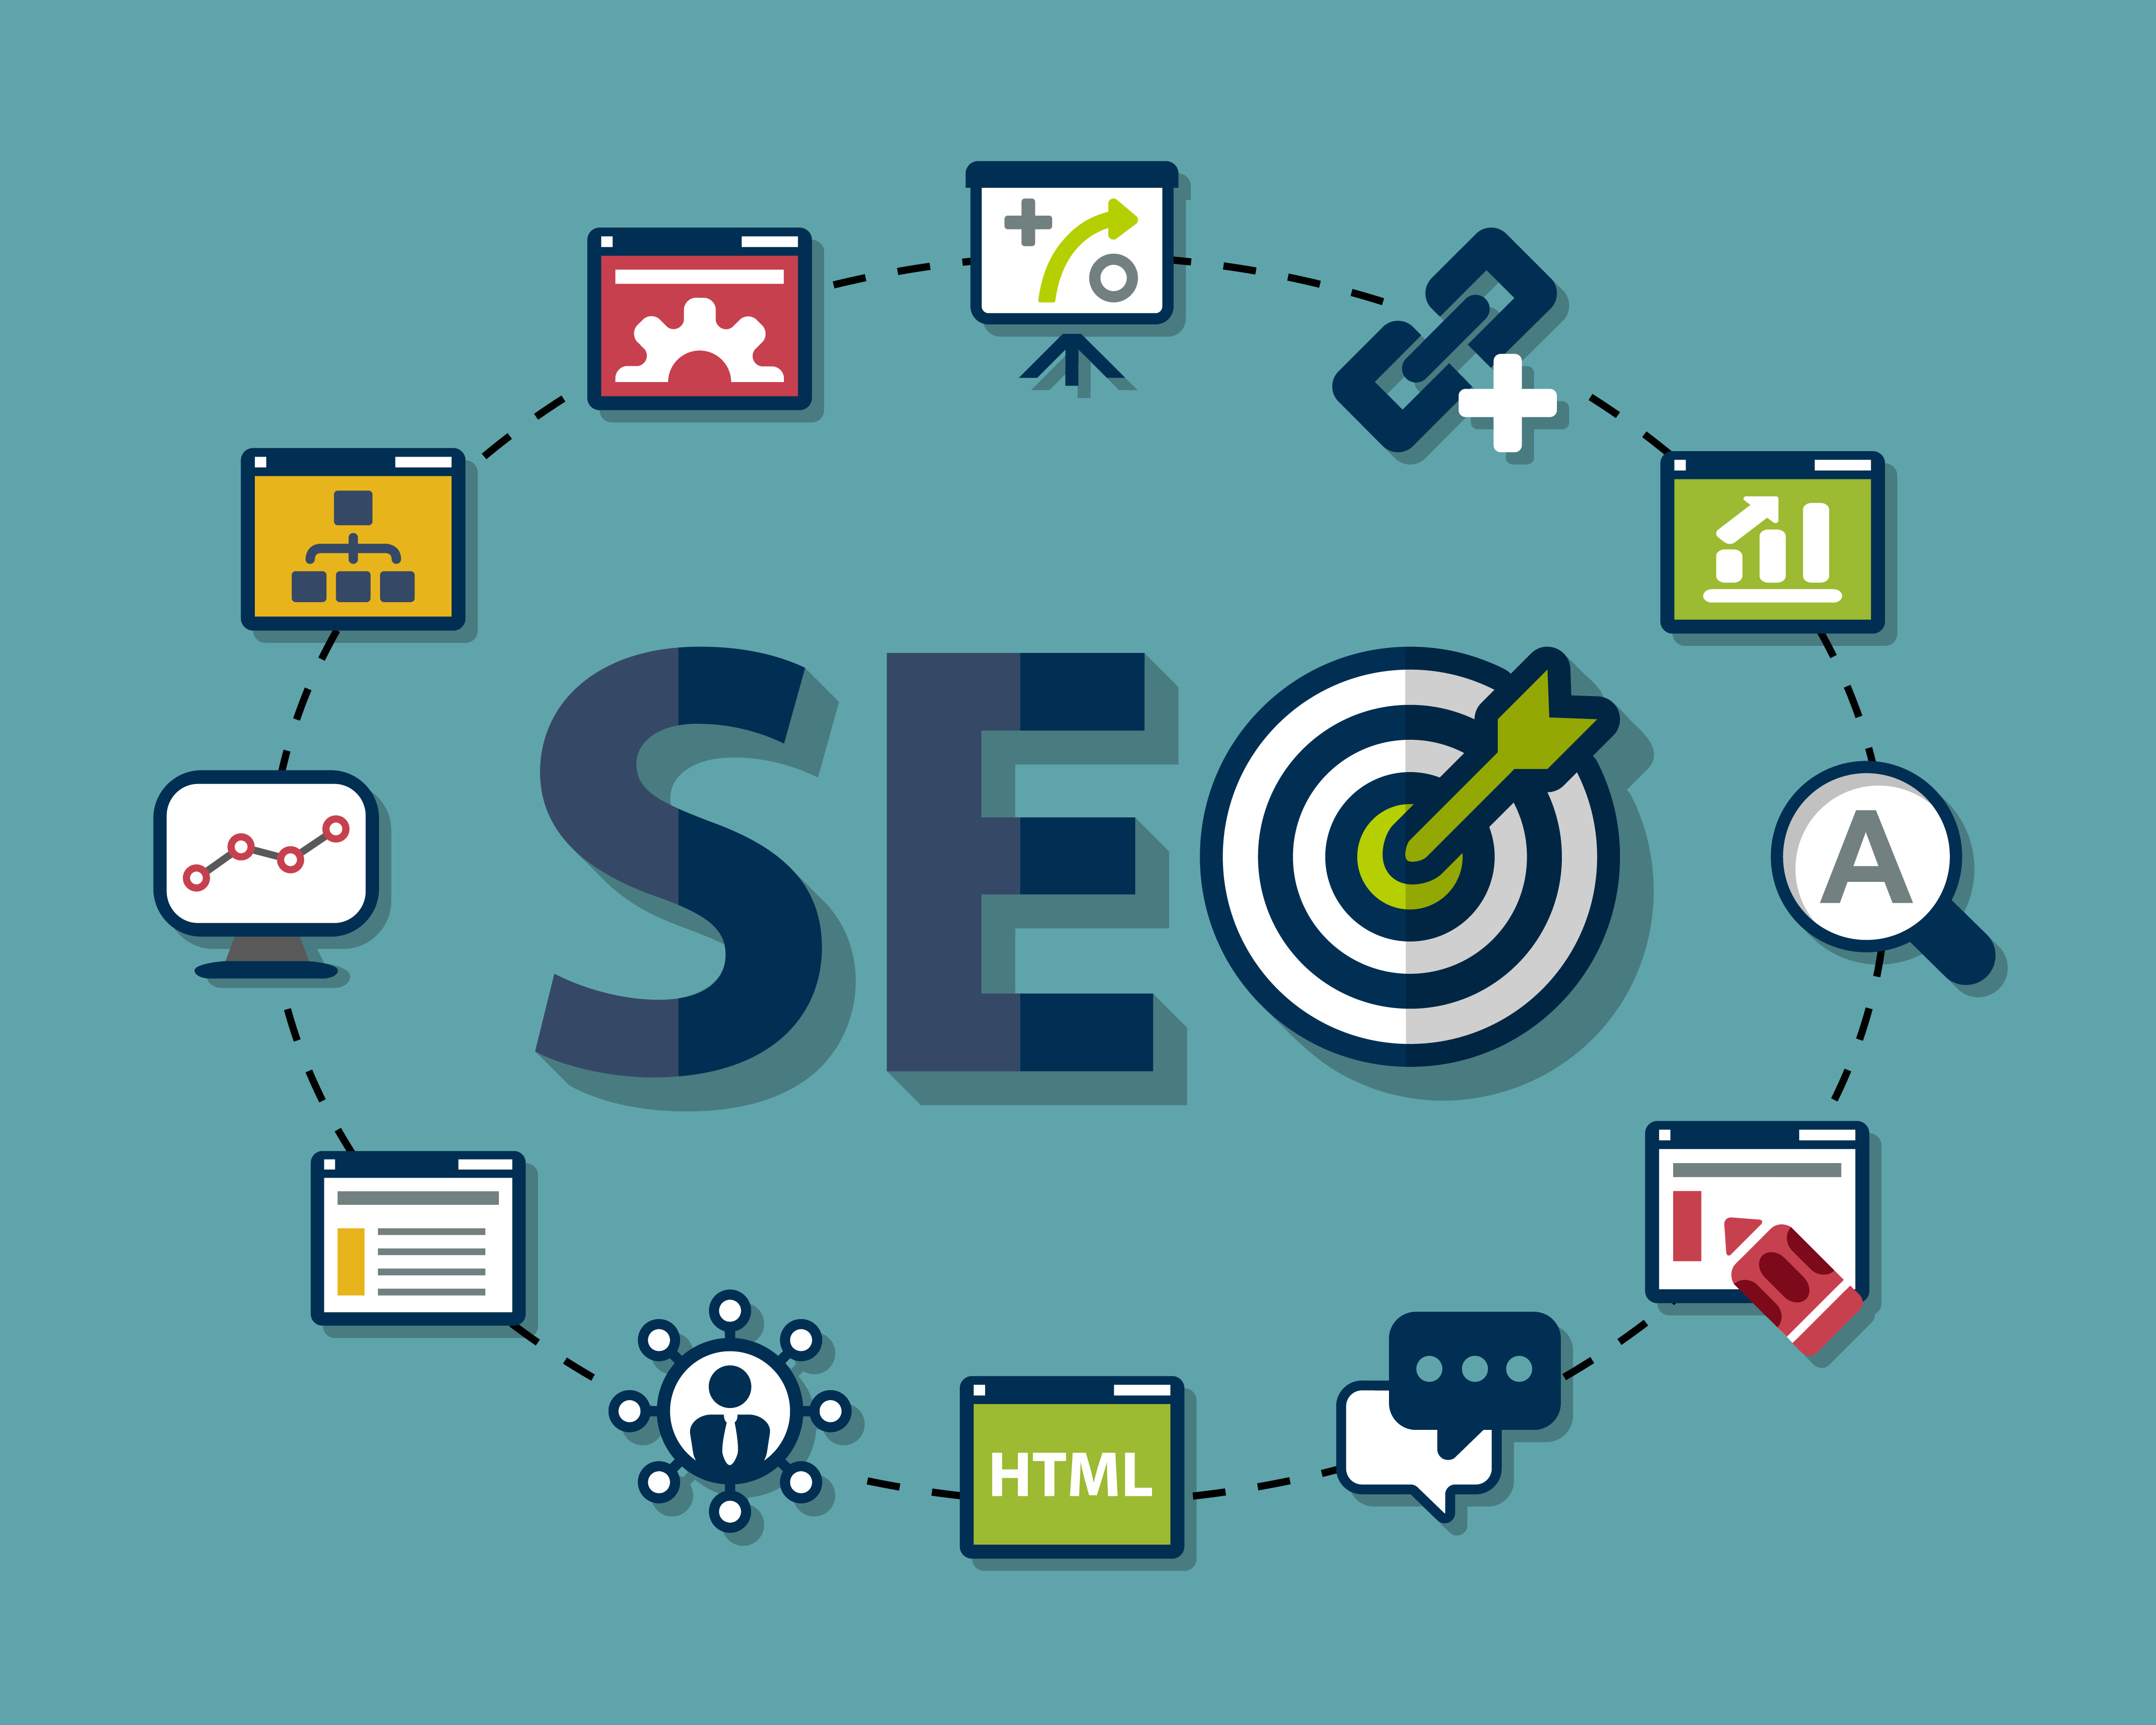 Is Your SEO Program Working? Here’s How to Tell